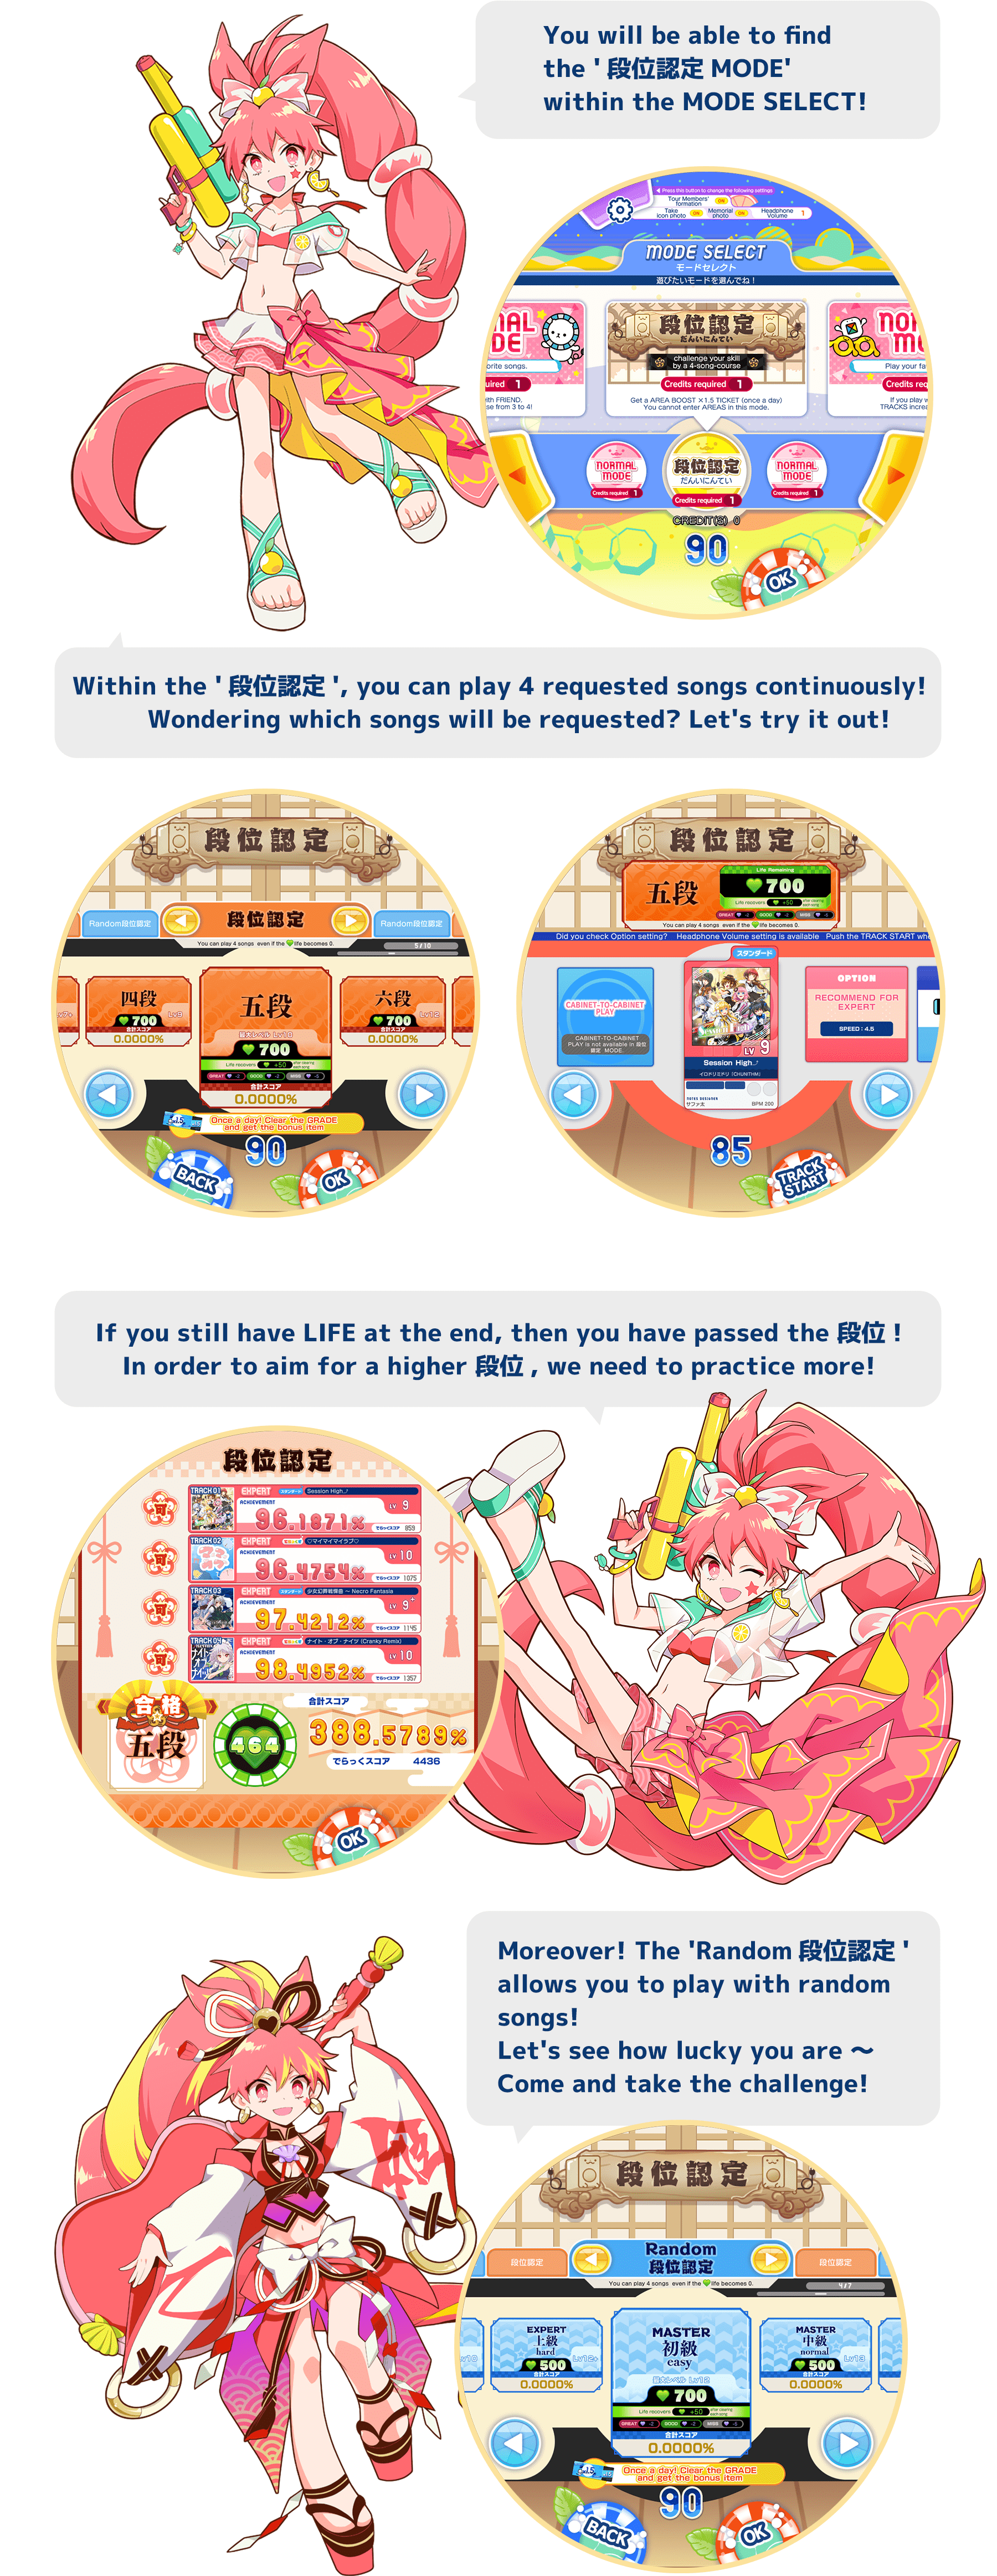 
          You will be able to find the '段位認定MODE' within the MODE SELECT!
          Within the '段位認定', you can play 4 requested songs continuously!
Wondering which songs will be requested? Let's try it out!
If you still have LIFE at the end, then you have passed the 段位!
In order to aim for a higher 段位, we need to practice more!
Moreover! The 'Random段位認定' allows you to play with random songs!
Let's see how lucky you are 〜Come and take the challenge!
          